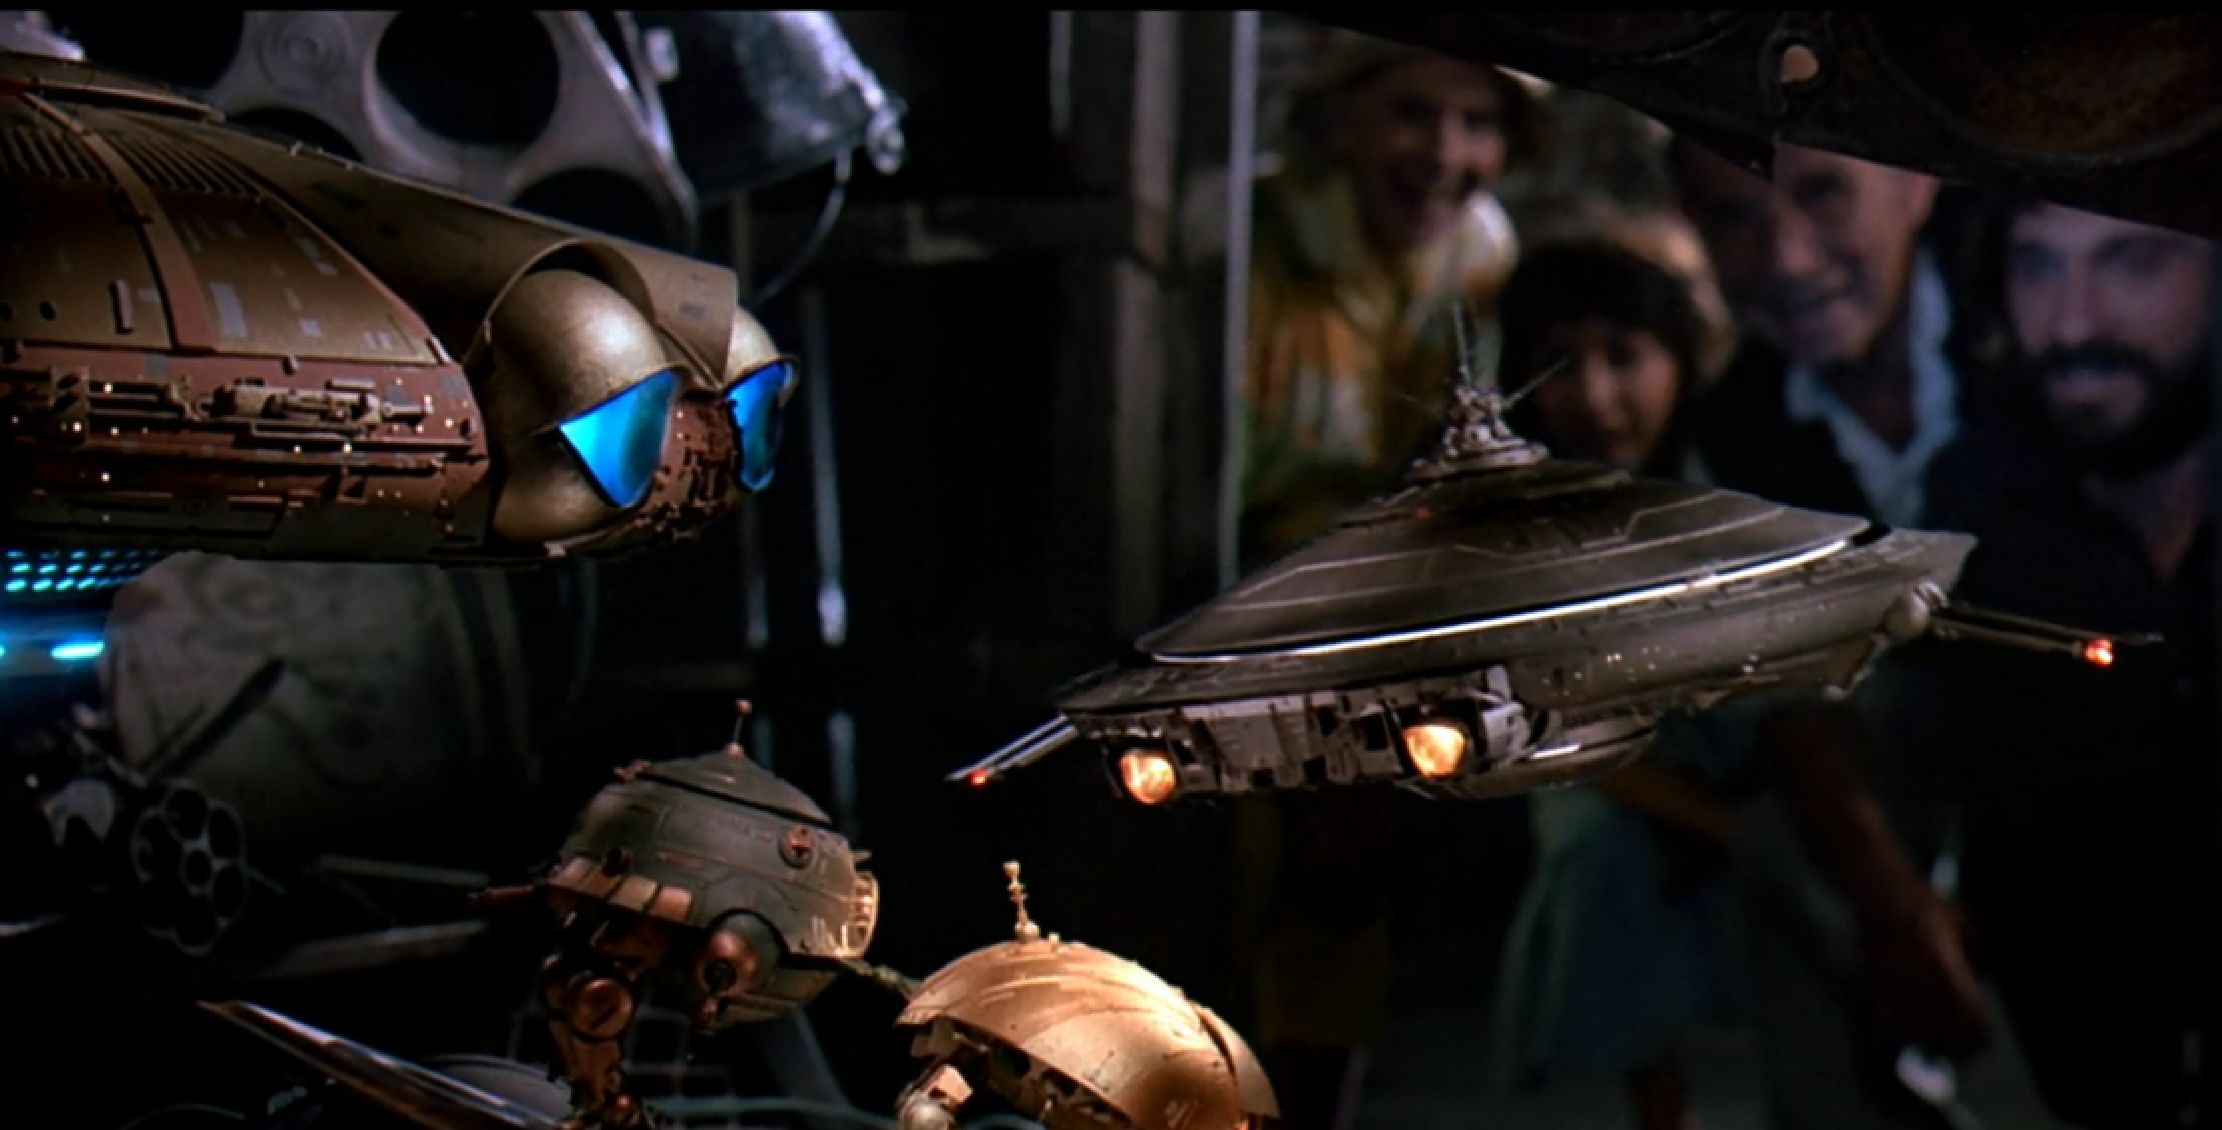 The aliens as they appeared in Batteries Not Included